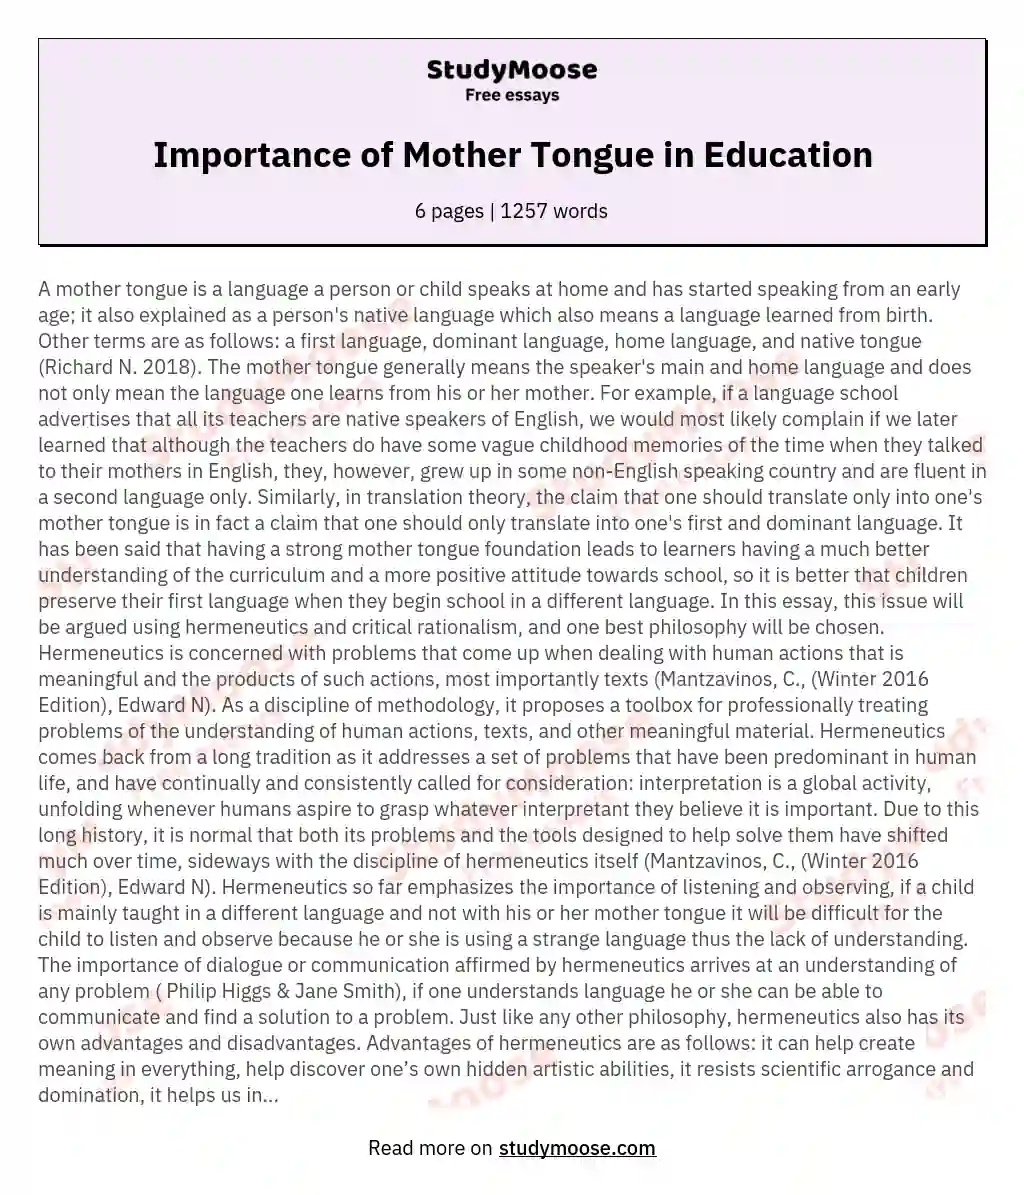 Importance of Mother Tongue in Education